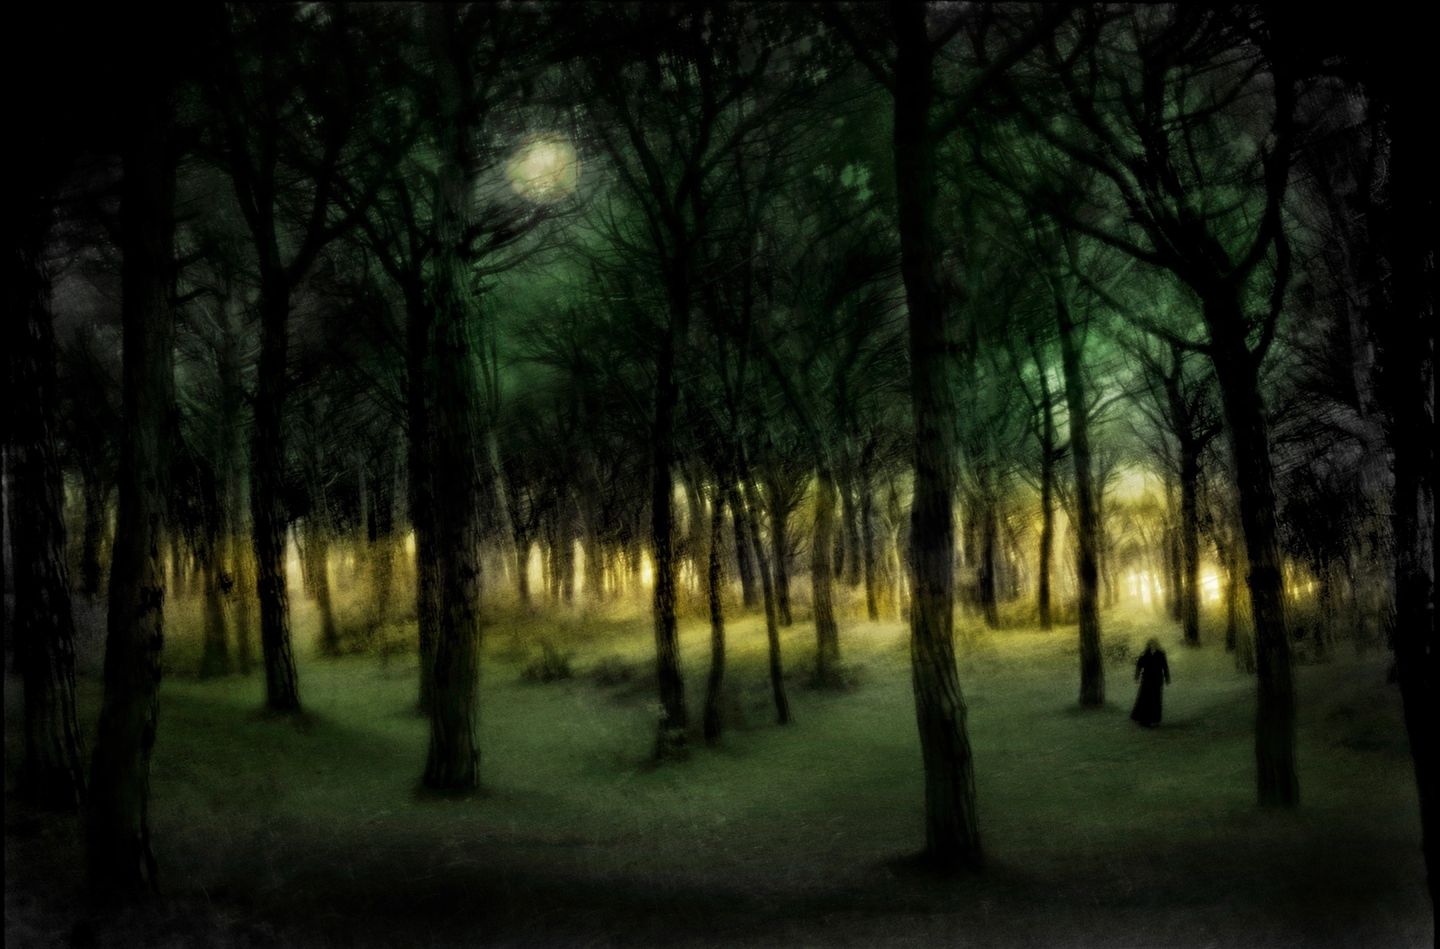 A painting of trees in the woods at night.